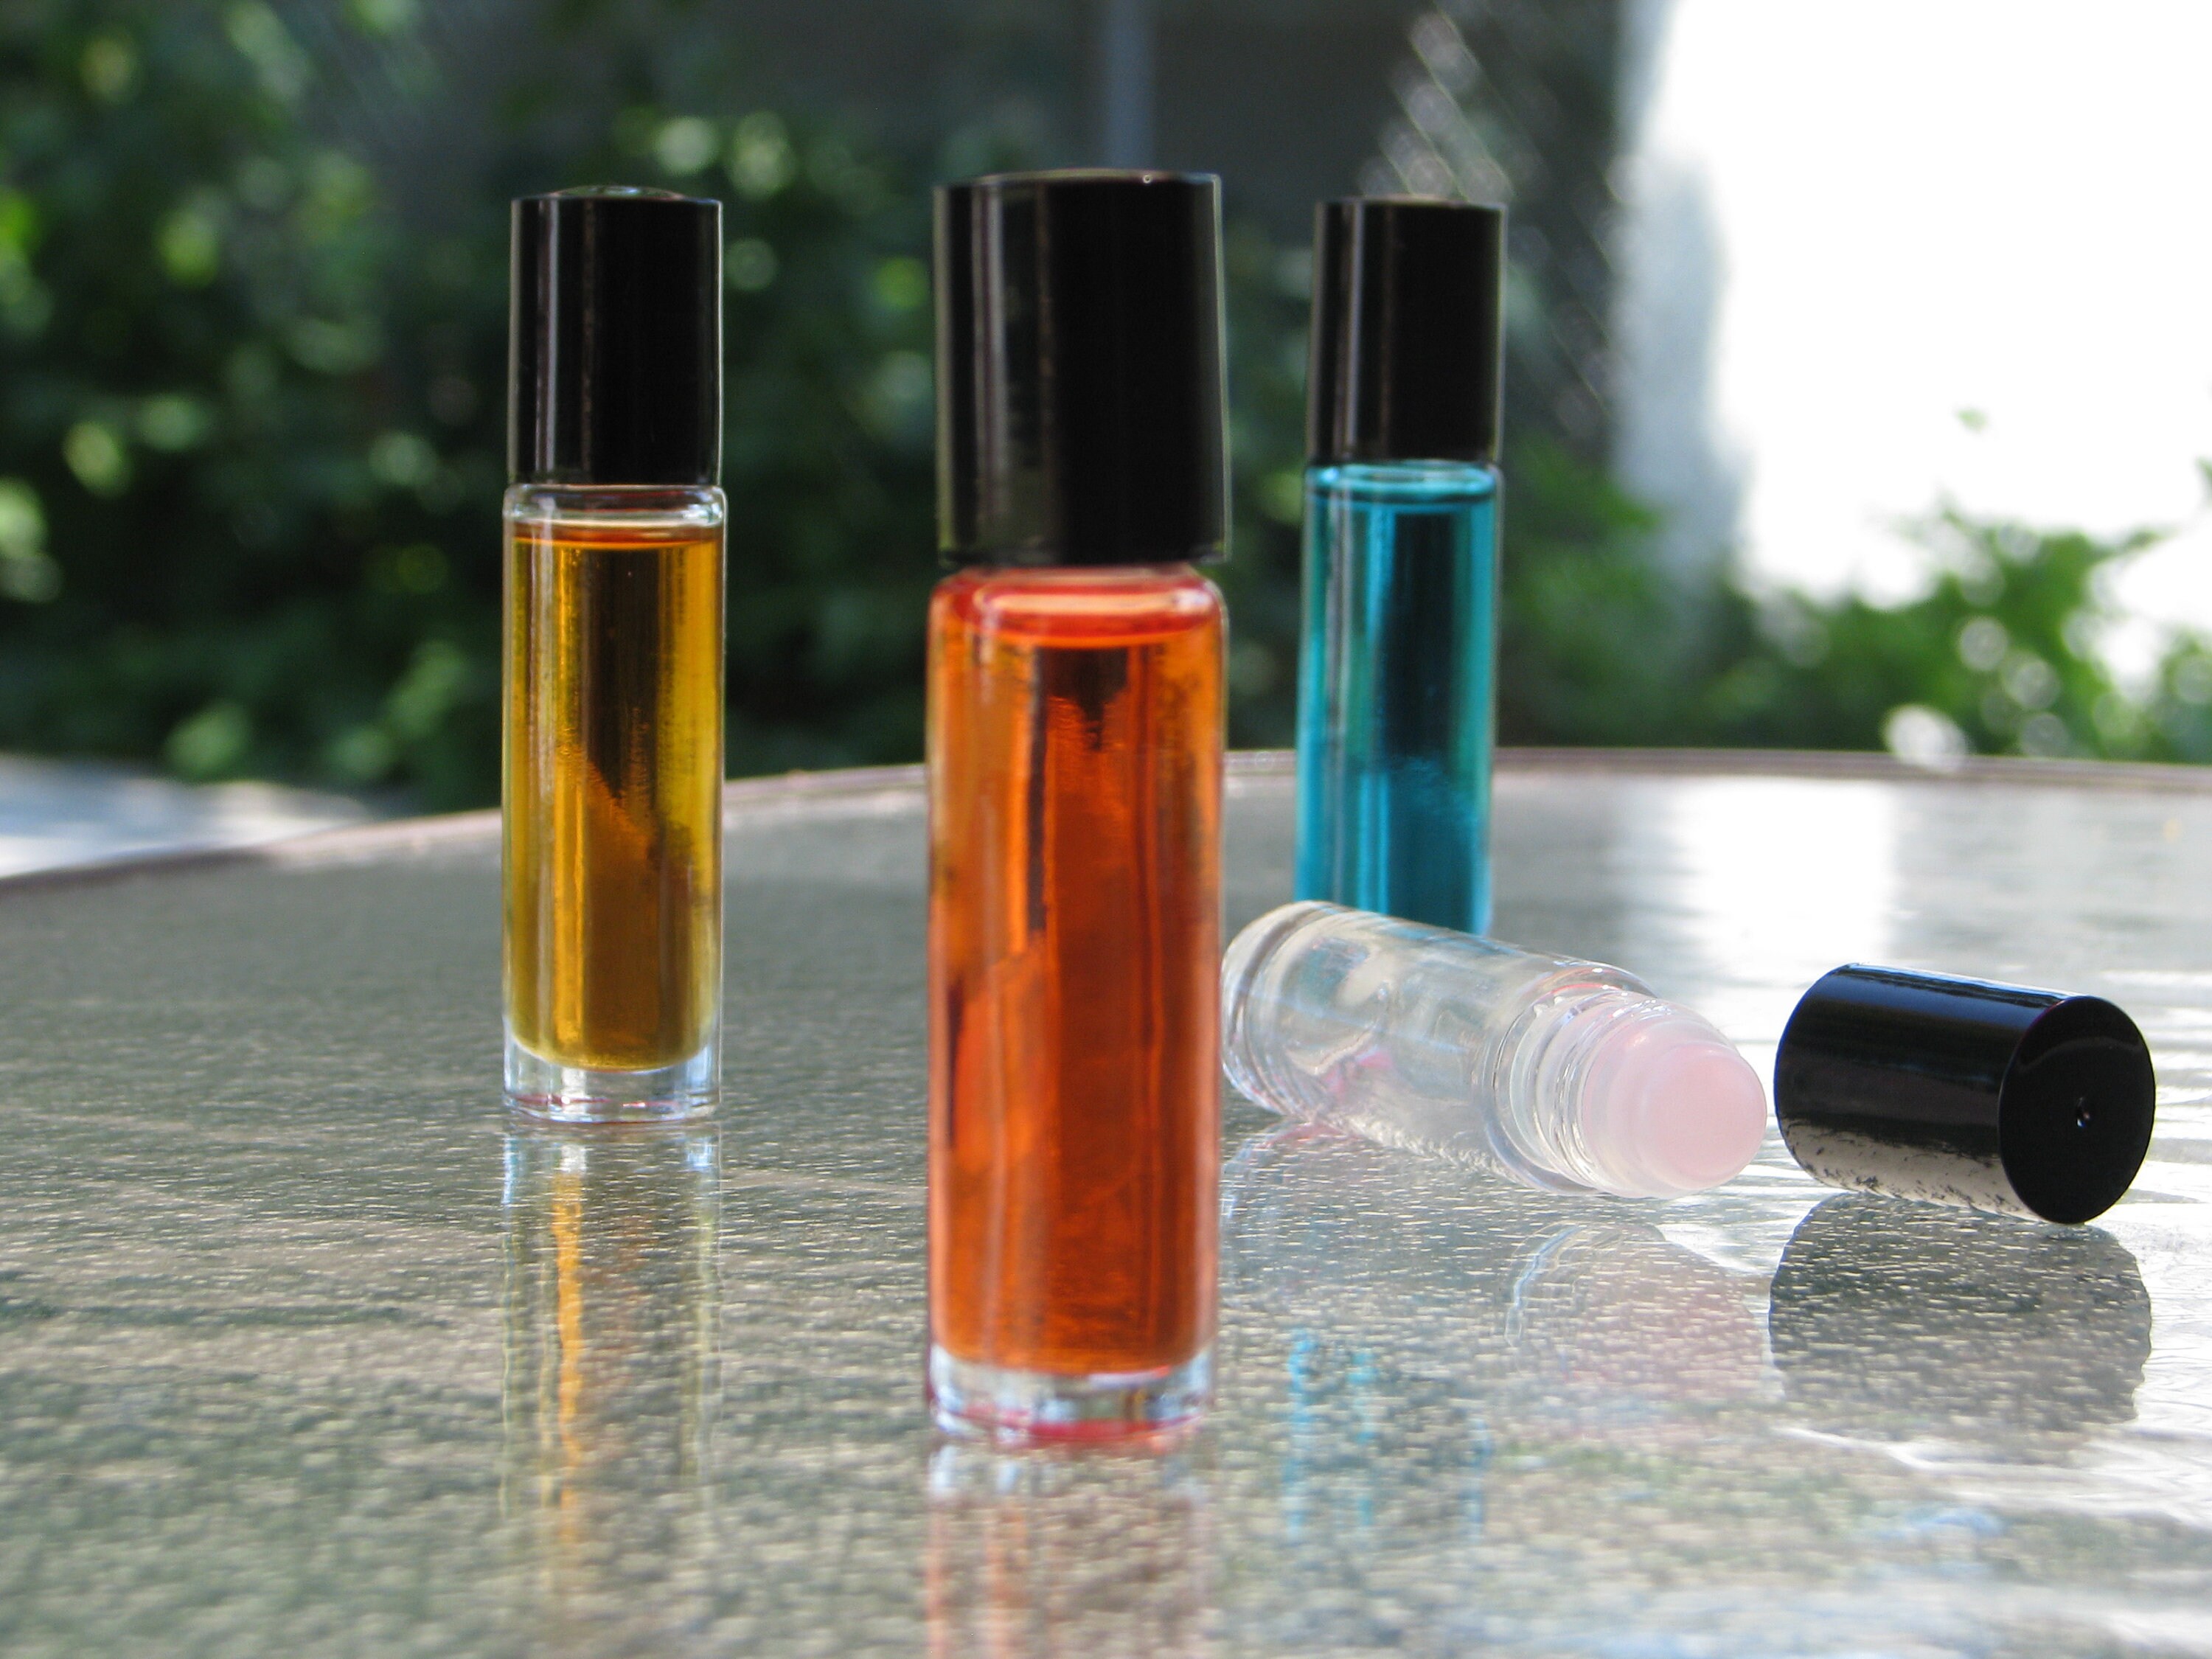 Aroma Shore Perfume Oil - Our Impression Of Bob Marley Type (2